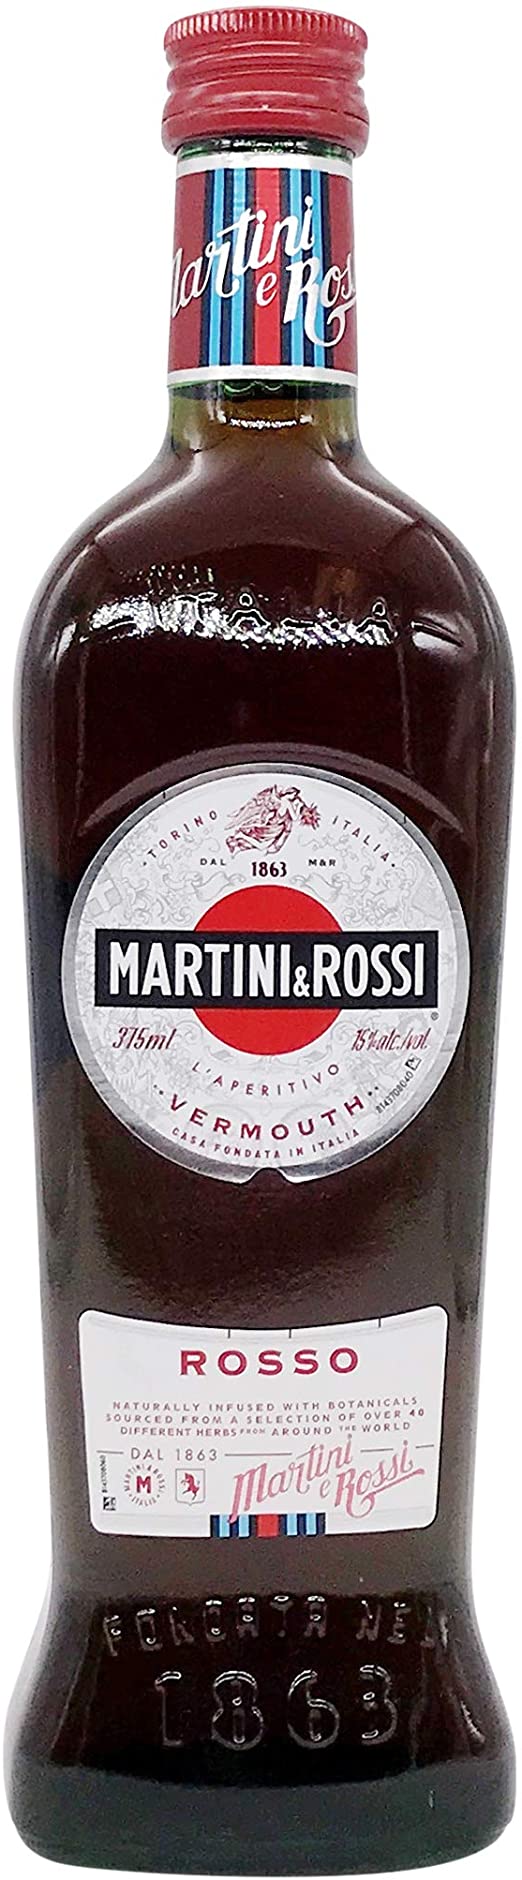 Martini & Rossi Sweet Vermouth, 375mL